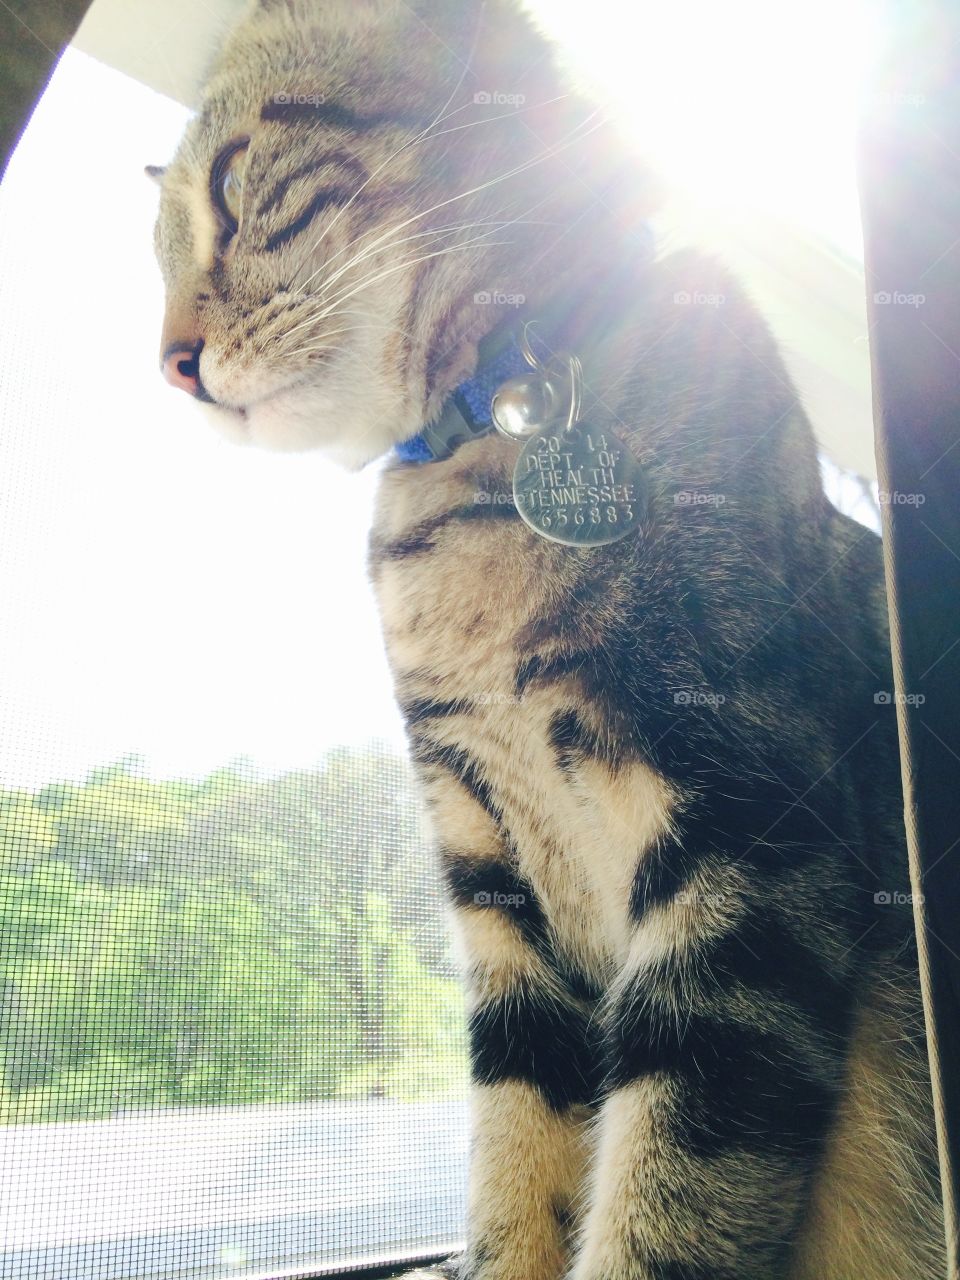 This is my baby Leo. He was having fun up in the window one morning.